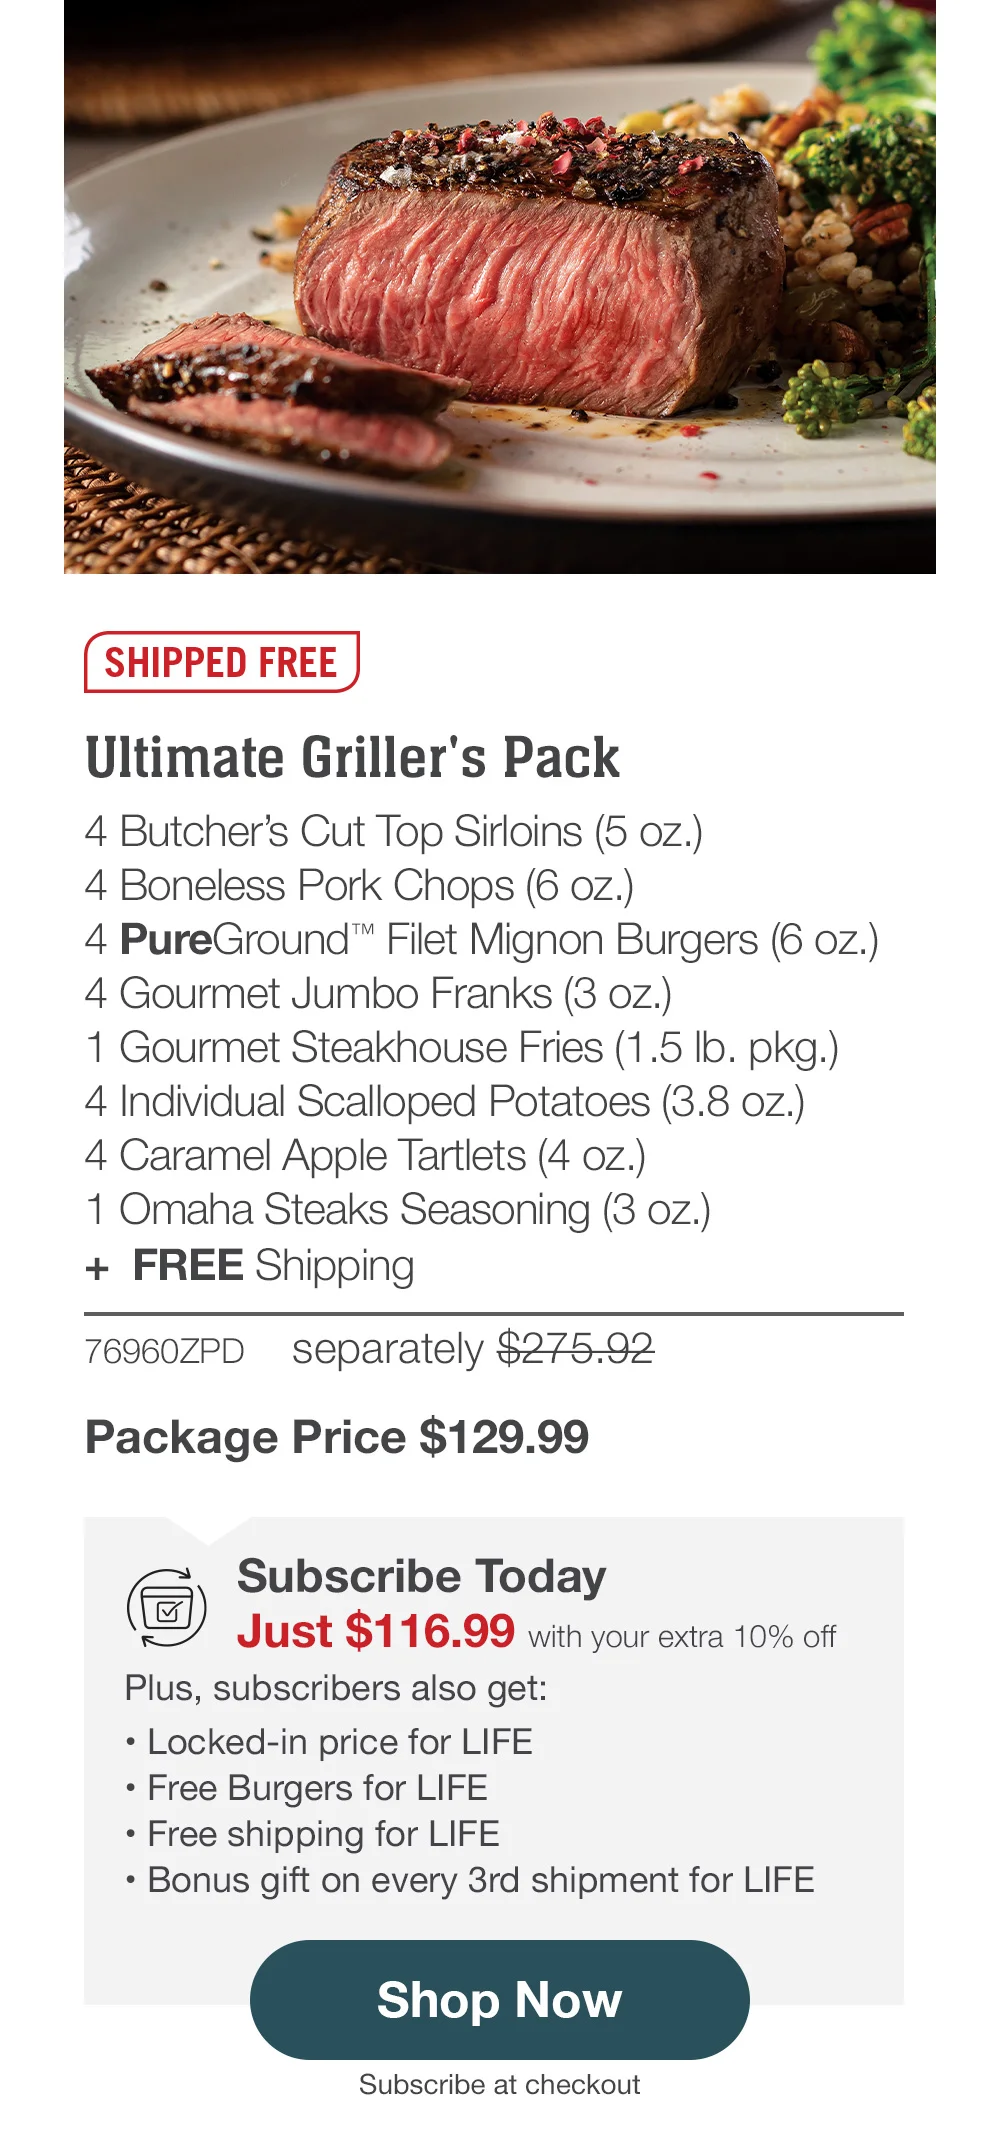 SHIPPED FREE | Ultimate Griller's Pack - 76960ZPD separately \\$275.92 | Package Price \\$129.99 | Subscribe Today - Just \\$116.99 with your extra 10% off Plus, subscribers also get: Locked-in price for LIFE | Free Burgers for LIFE | Free shipping for LIFE | Bonus gift on every 3rd shipment for LIFE || Shop Now || Subscribe at checkout